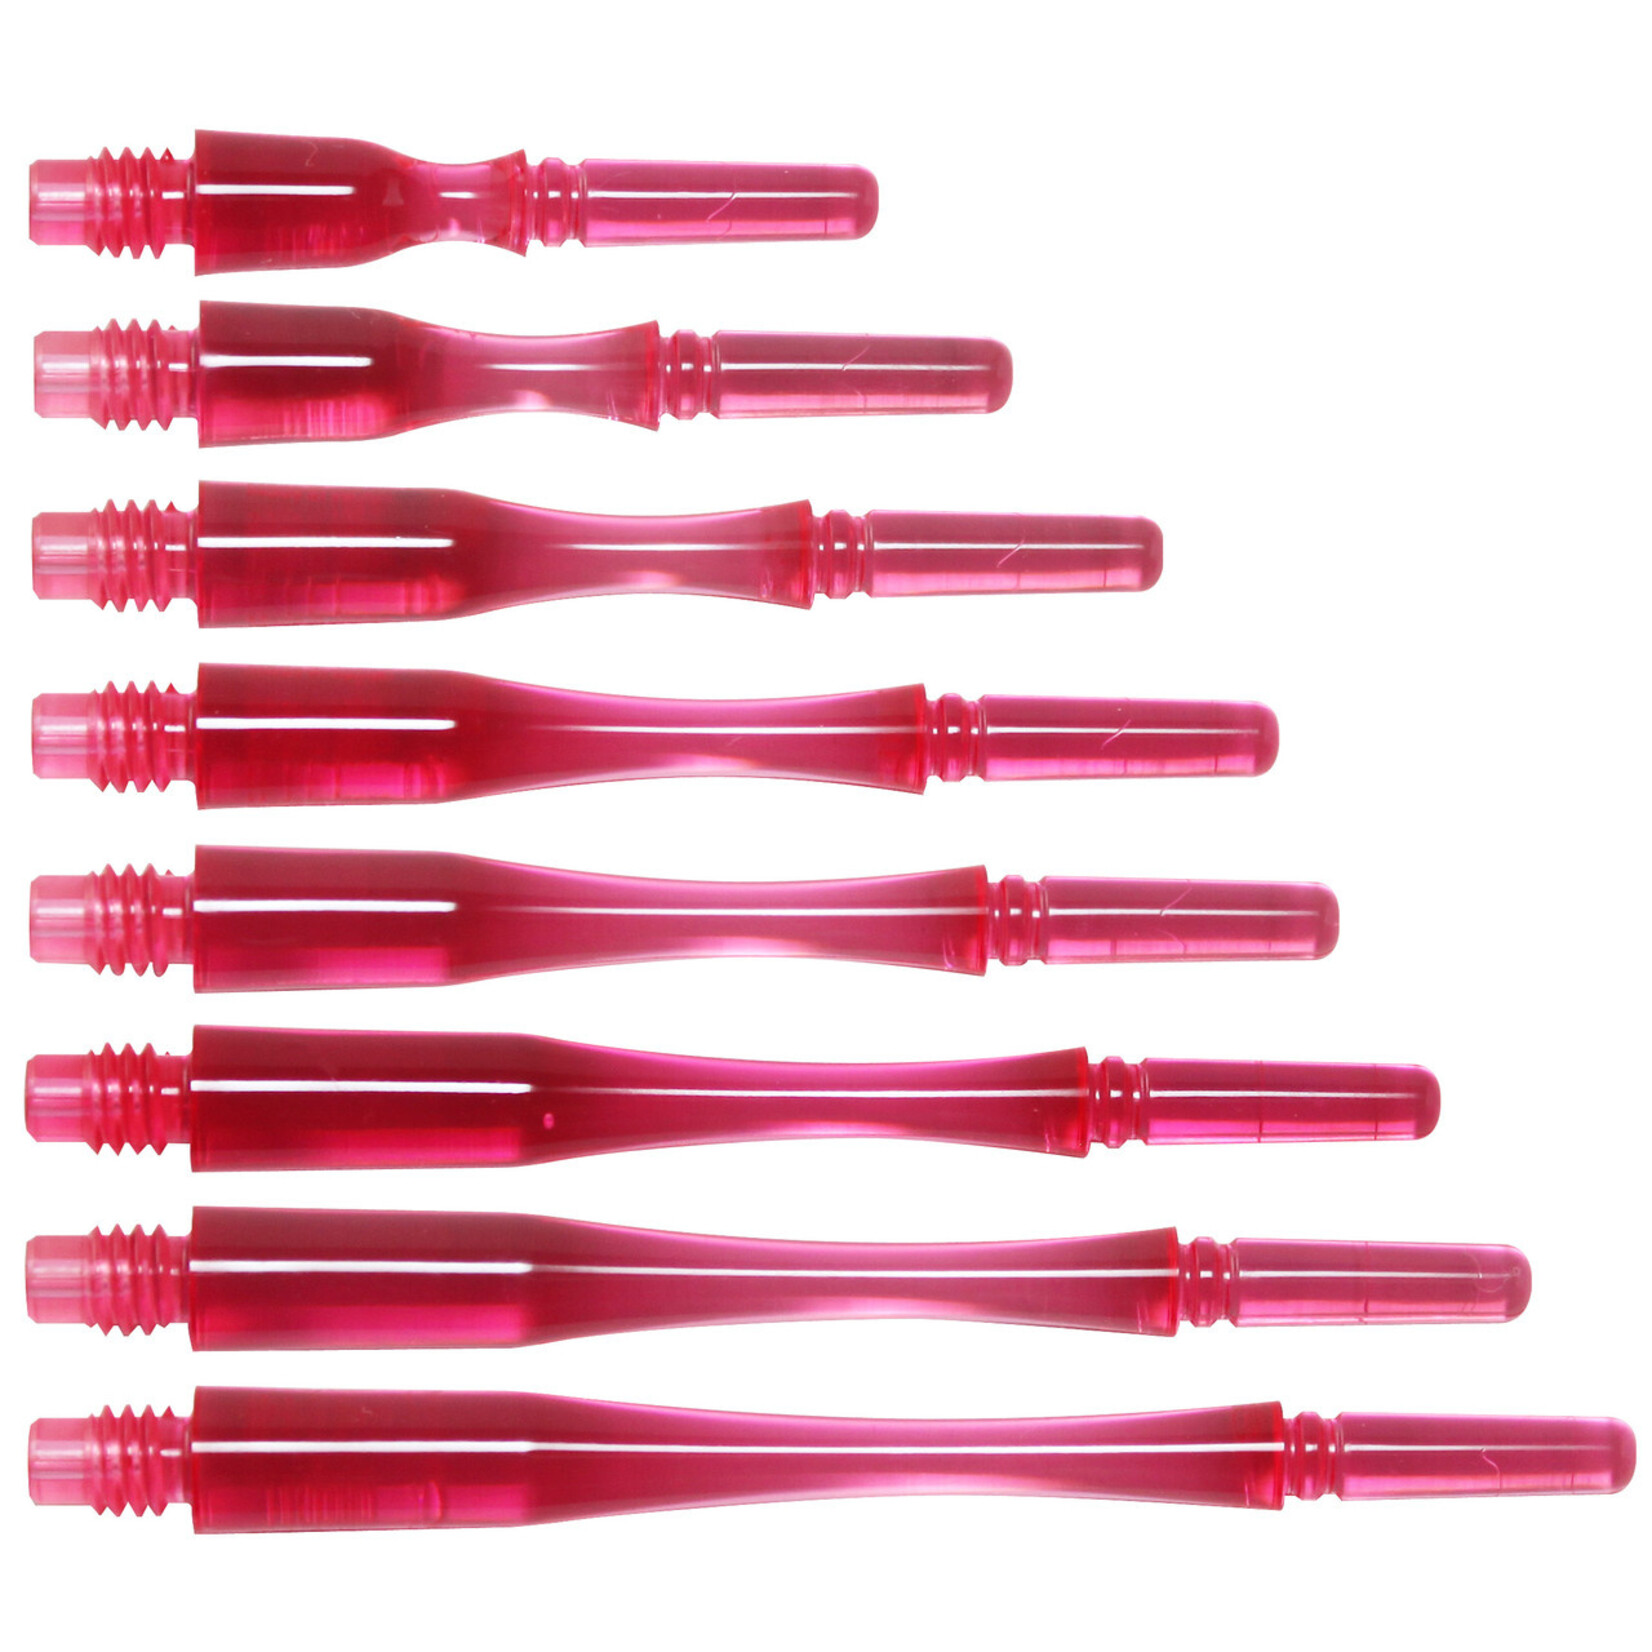 COSMO DARTS Cosmo Fit Gear Hybrid Spinning Clear Pink Dart Shafts